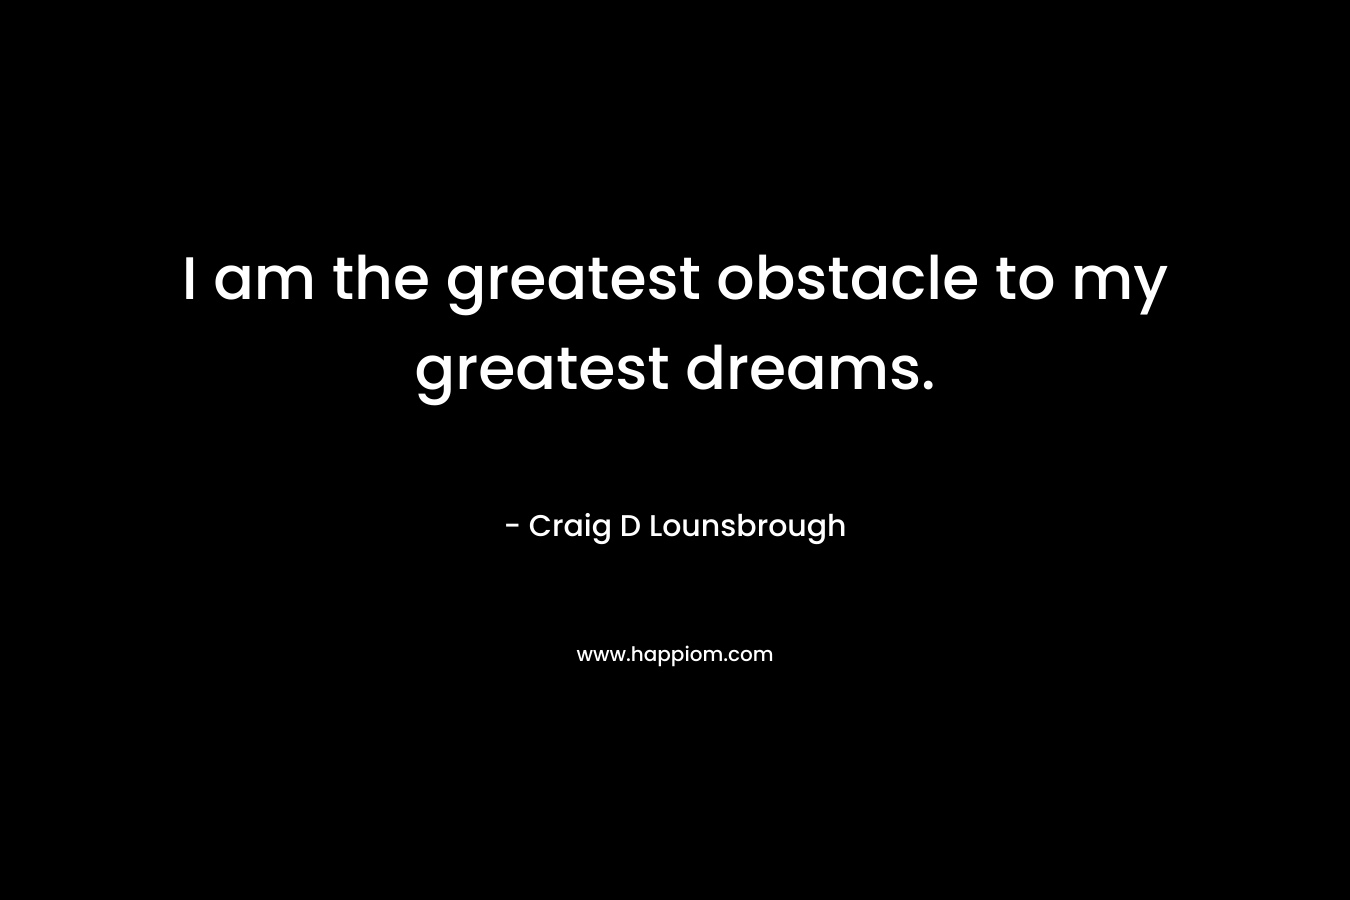 I am the greatest obstacle to my greatest dreams.